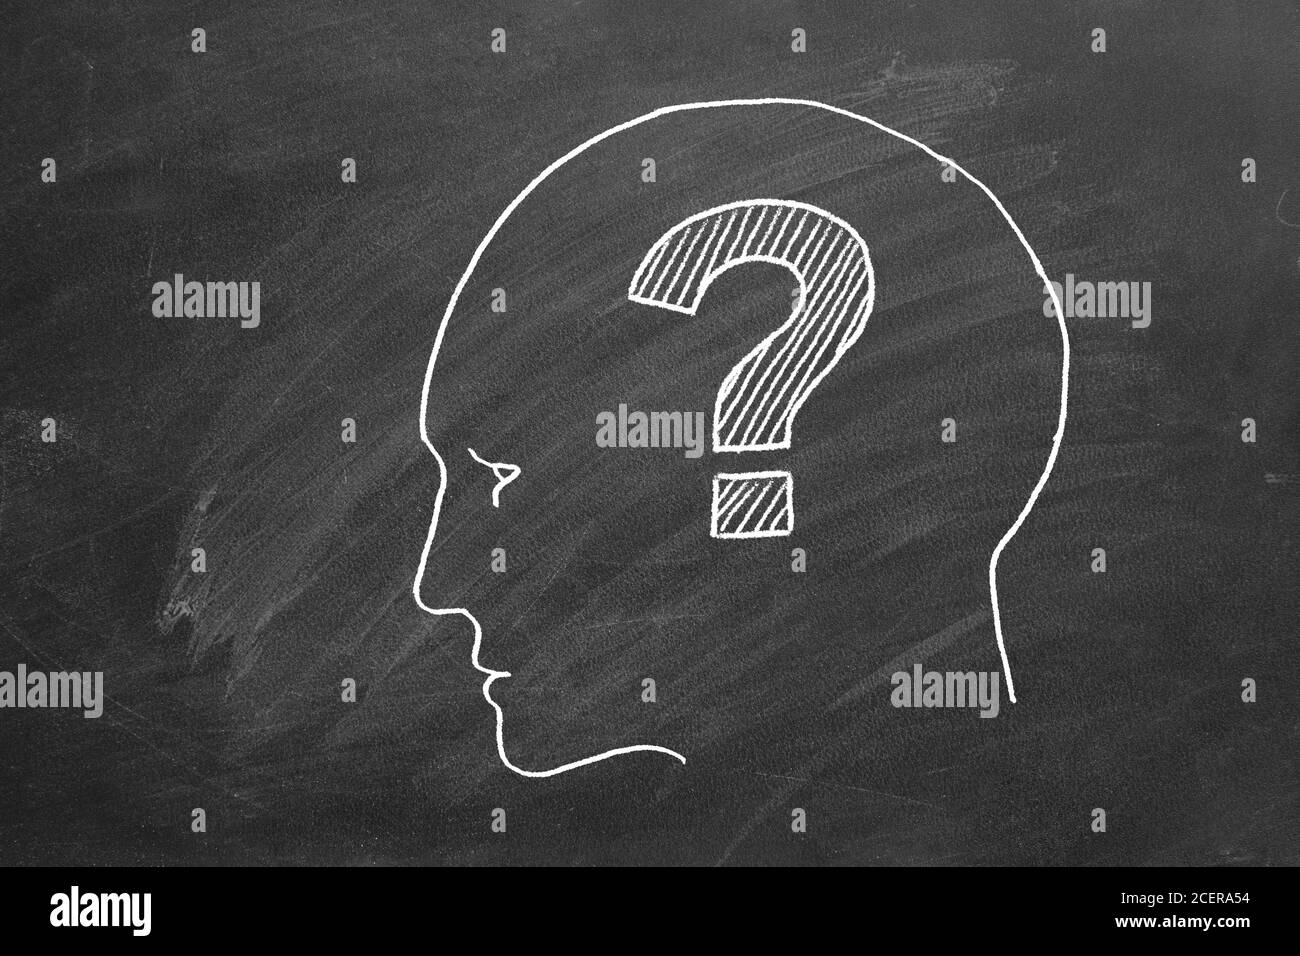 Human face with question mark inside. Illustration on blackboard. Stock Photo